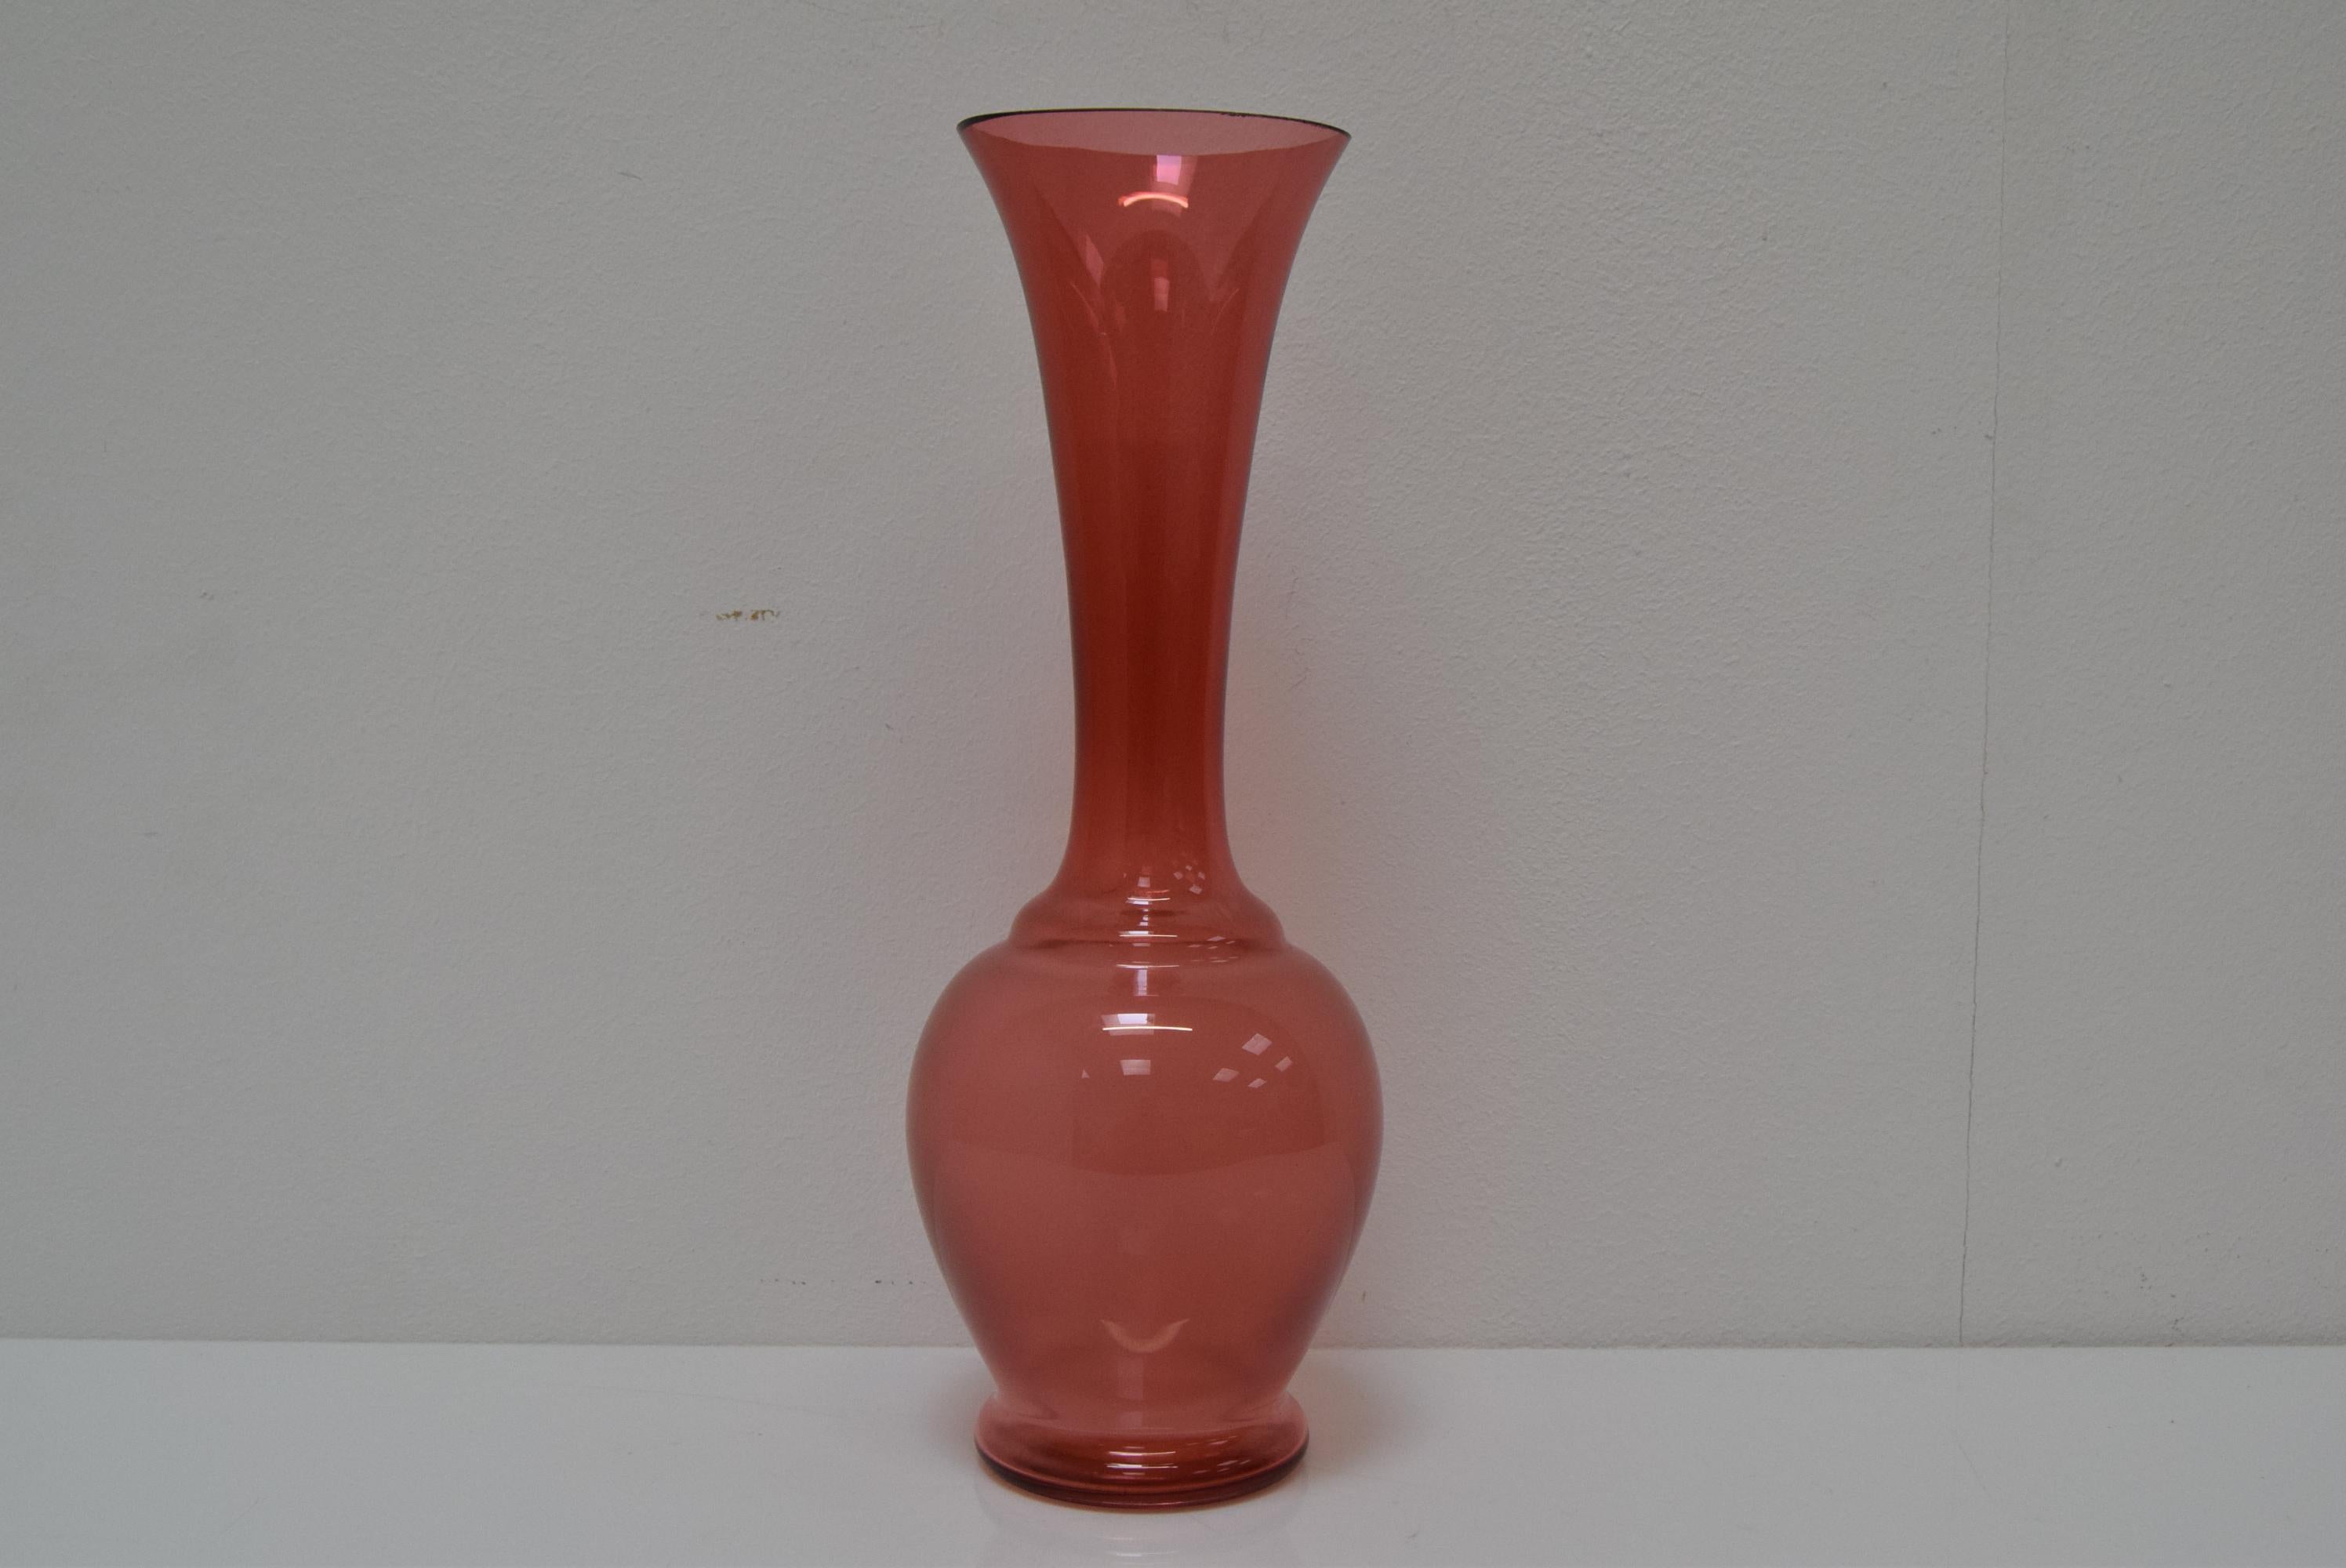 
Made in Czechoslovakia
Made of Art Glass
Re-polished
Original condition.